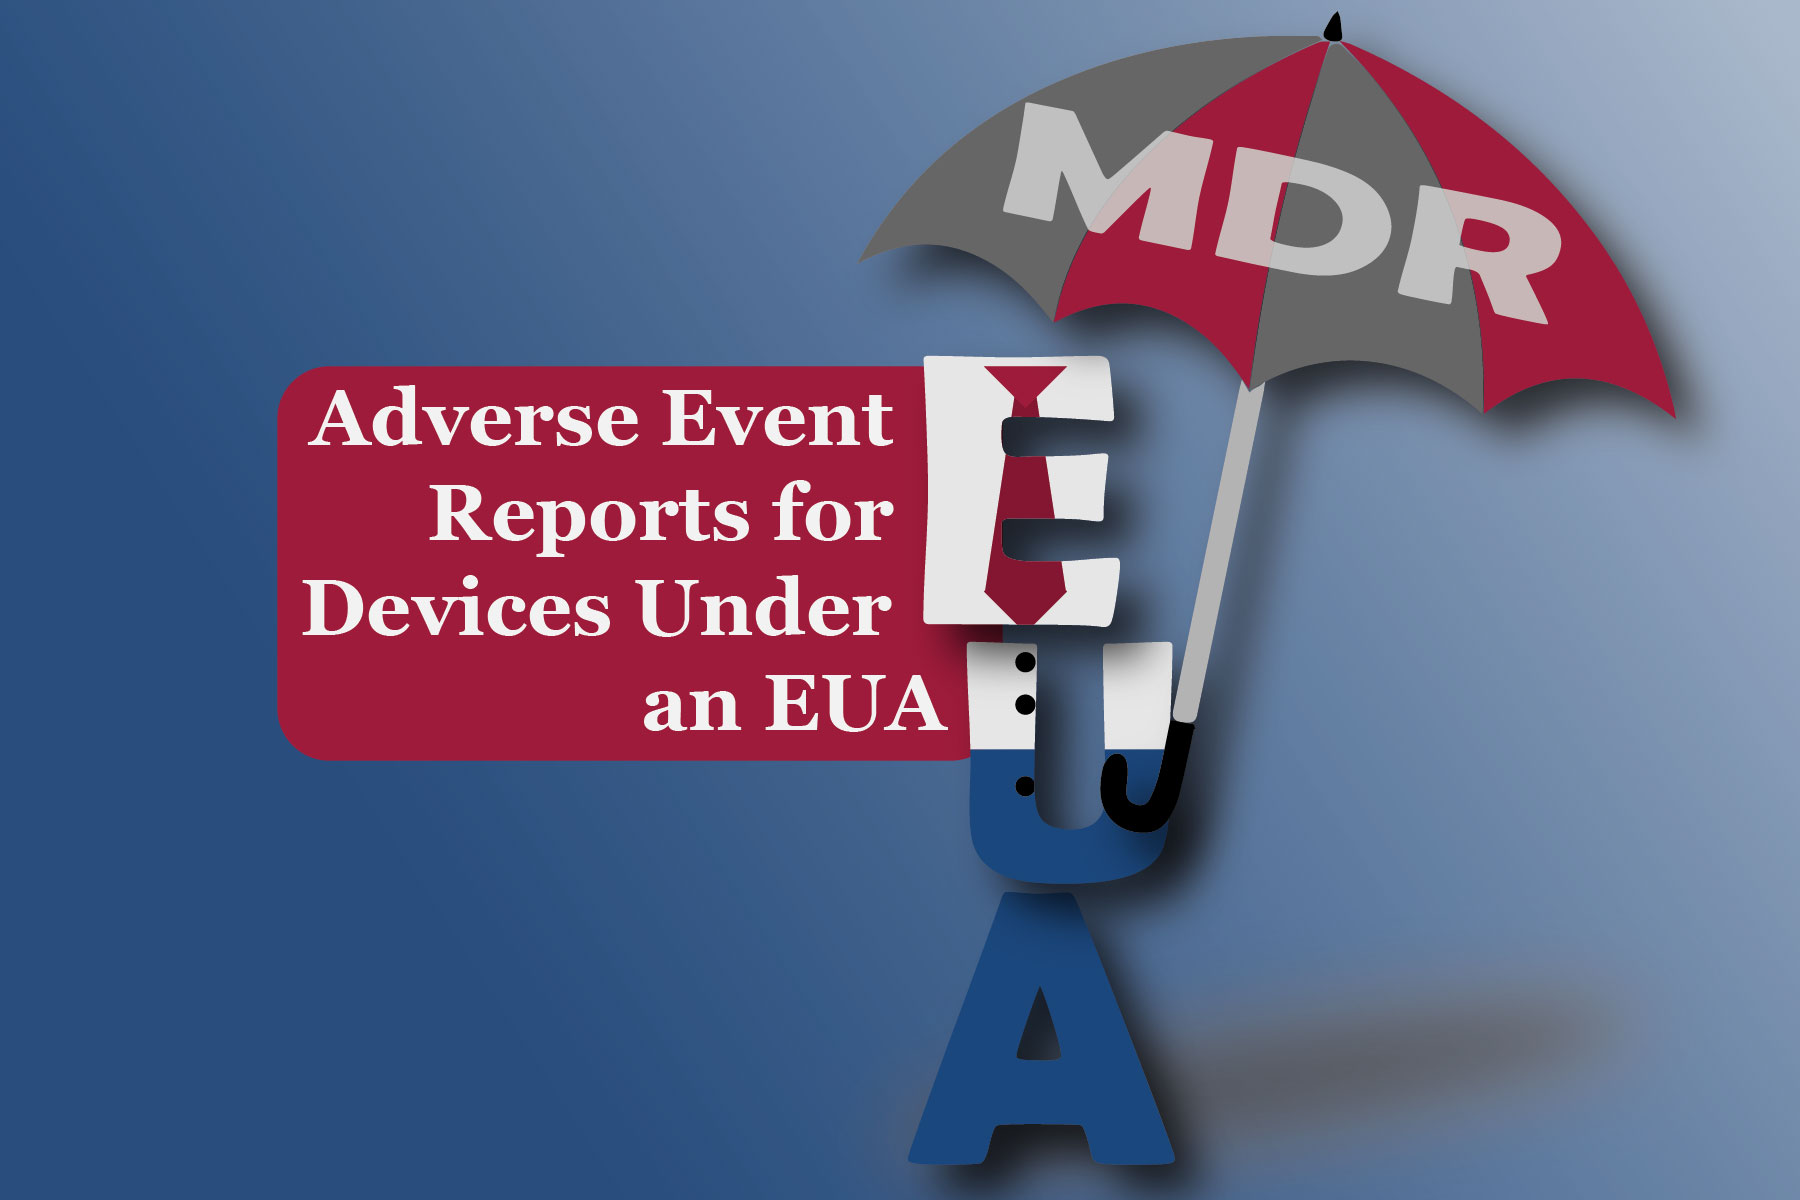 Adverse Event Reports for Devices Under an EUA